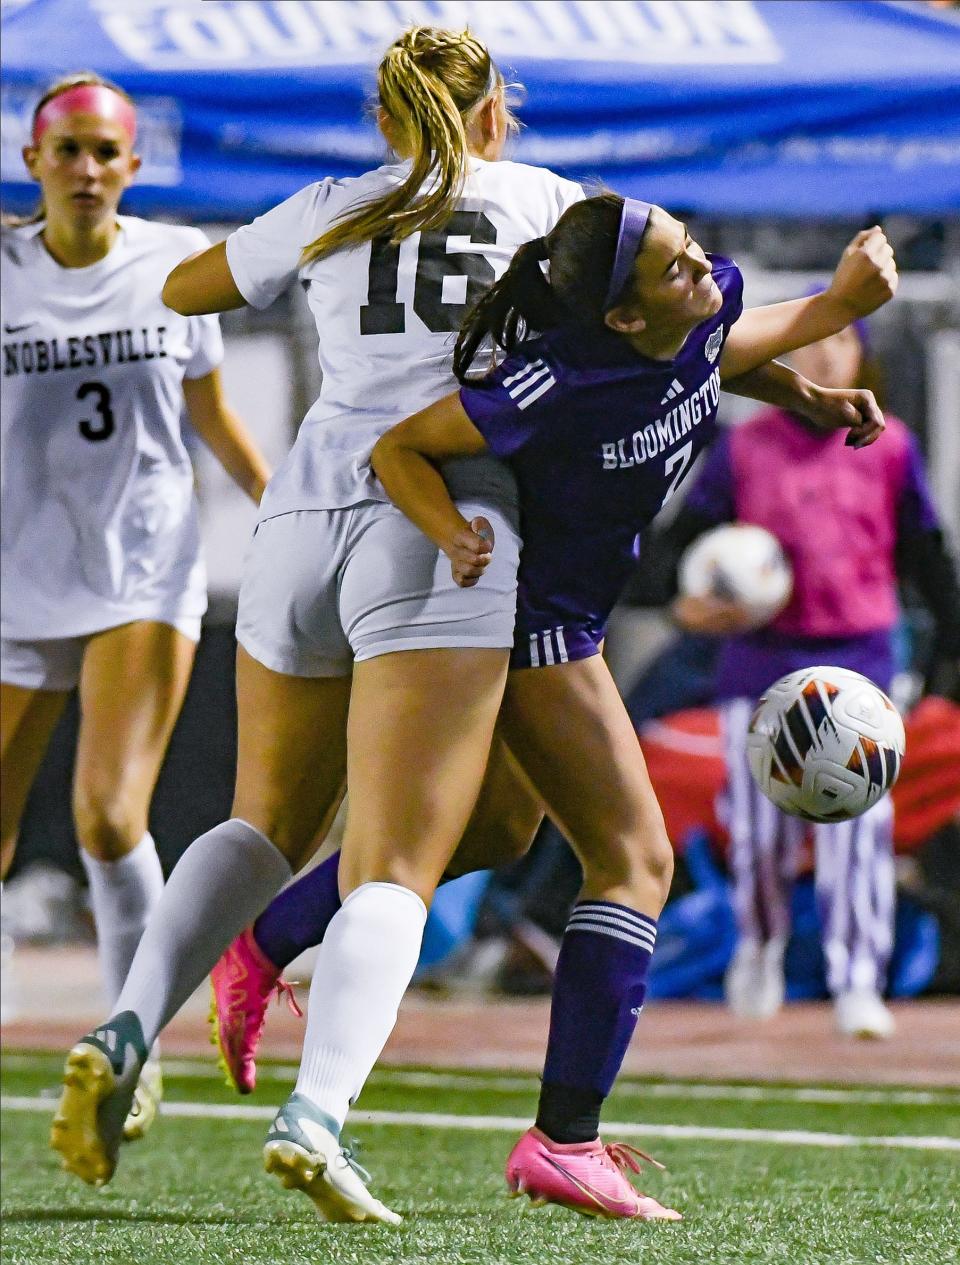 Bloomington South’s Helena Cutshall (7) and Noblesville’s Ashlyn McNitt (16) battle for possession of the ball during the IHSAA girls’ soccer state championship match at Michael Carroll Track & Soccer Stadium in Indianapolis, Ind. on Saturday, Oct. 28, 2023.